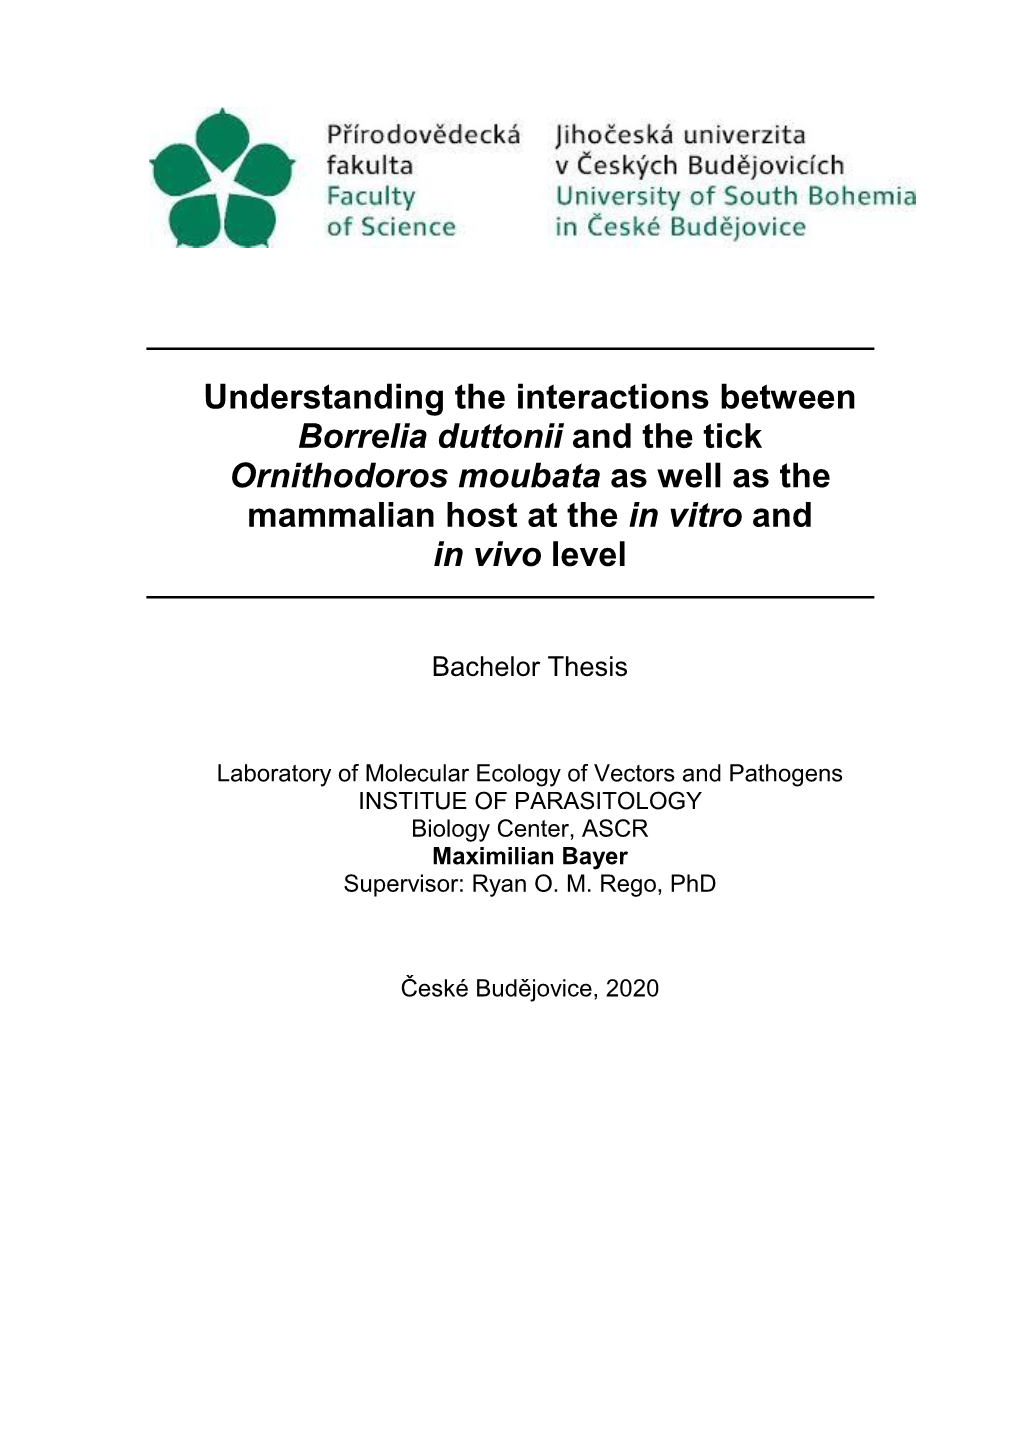 Understanding the Interactions Between Borrelia Duttonii and the Tick Ornithodoros Moubata As Well As the Mammalian Host at the in Vitro and in Vivo Level